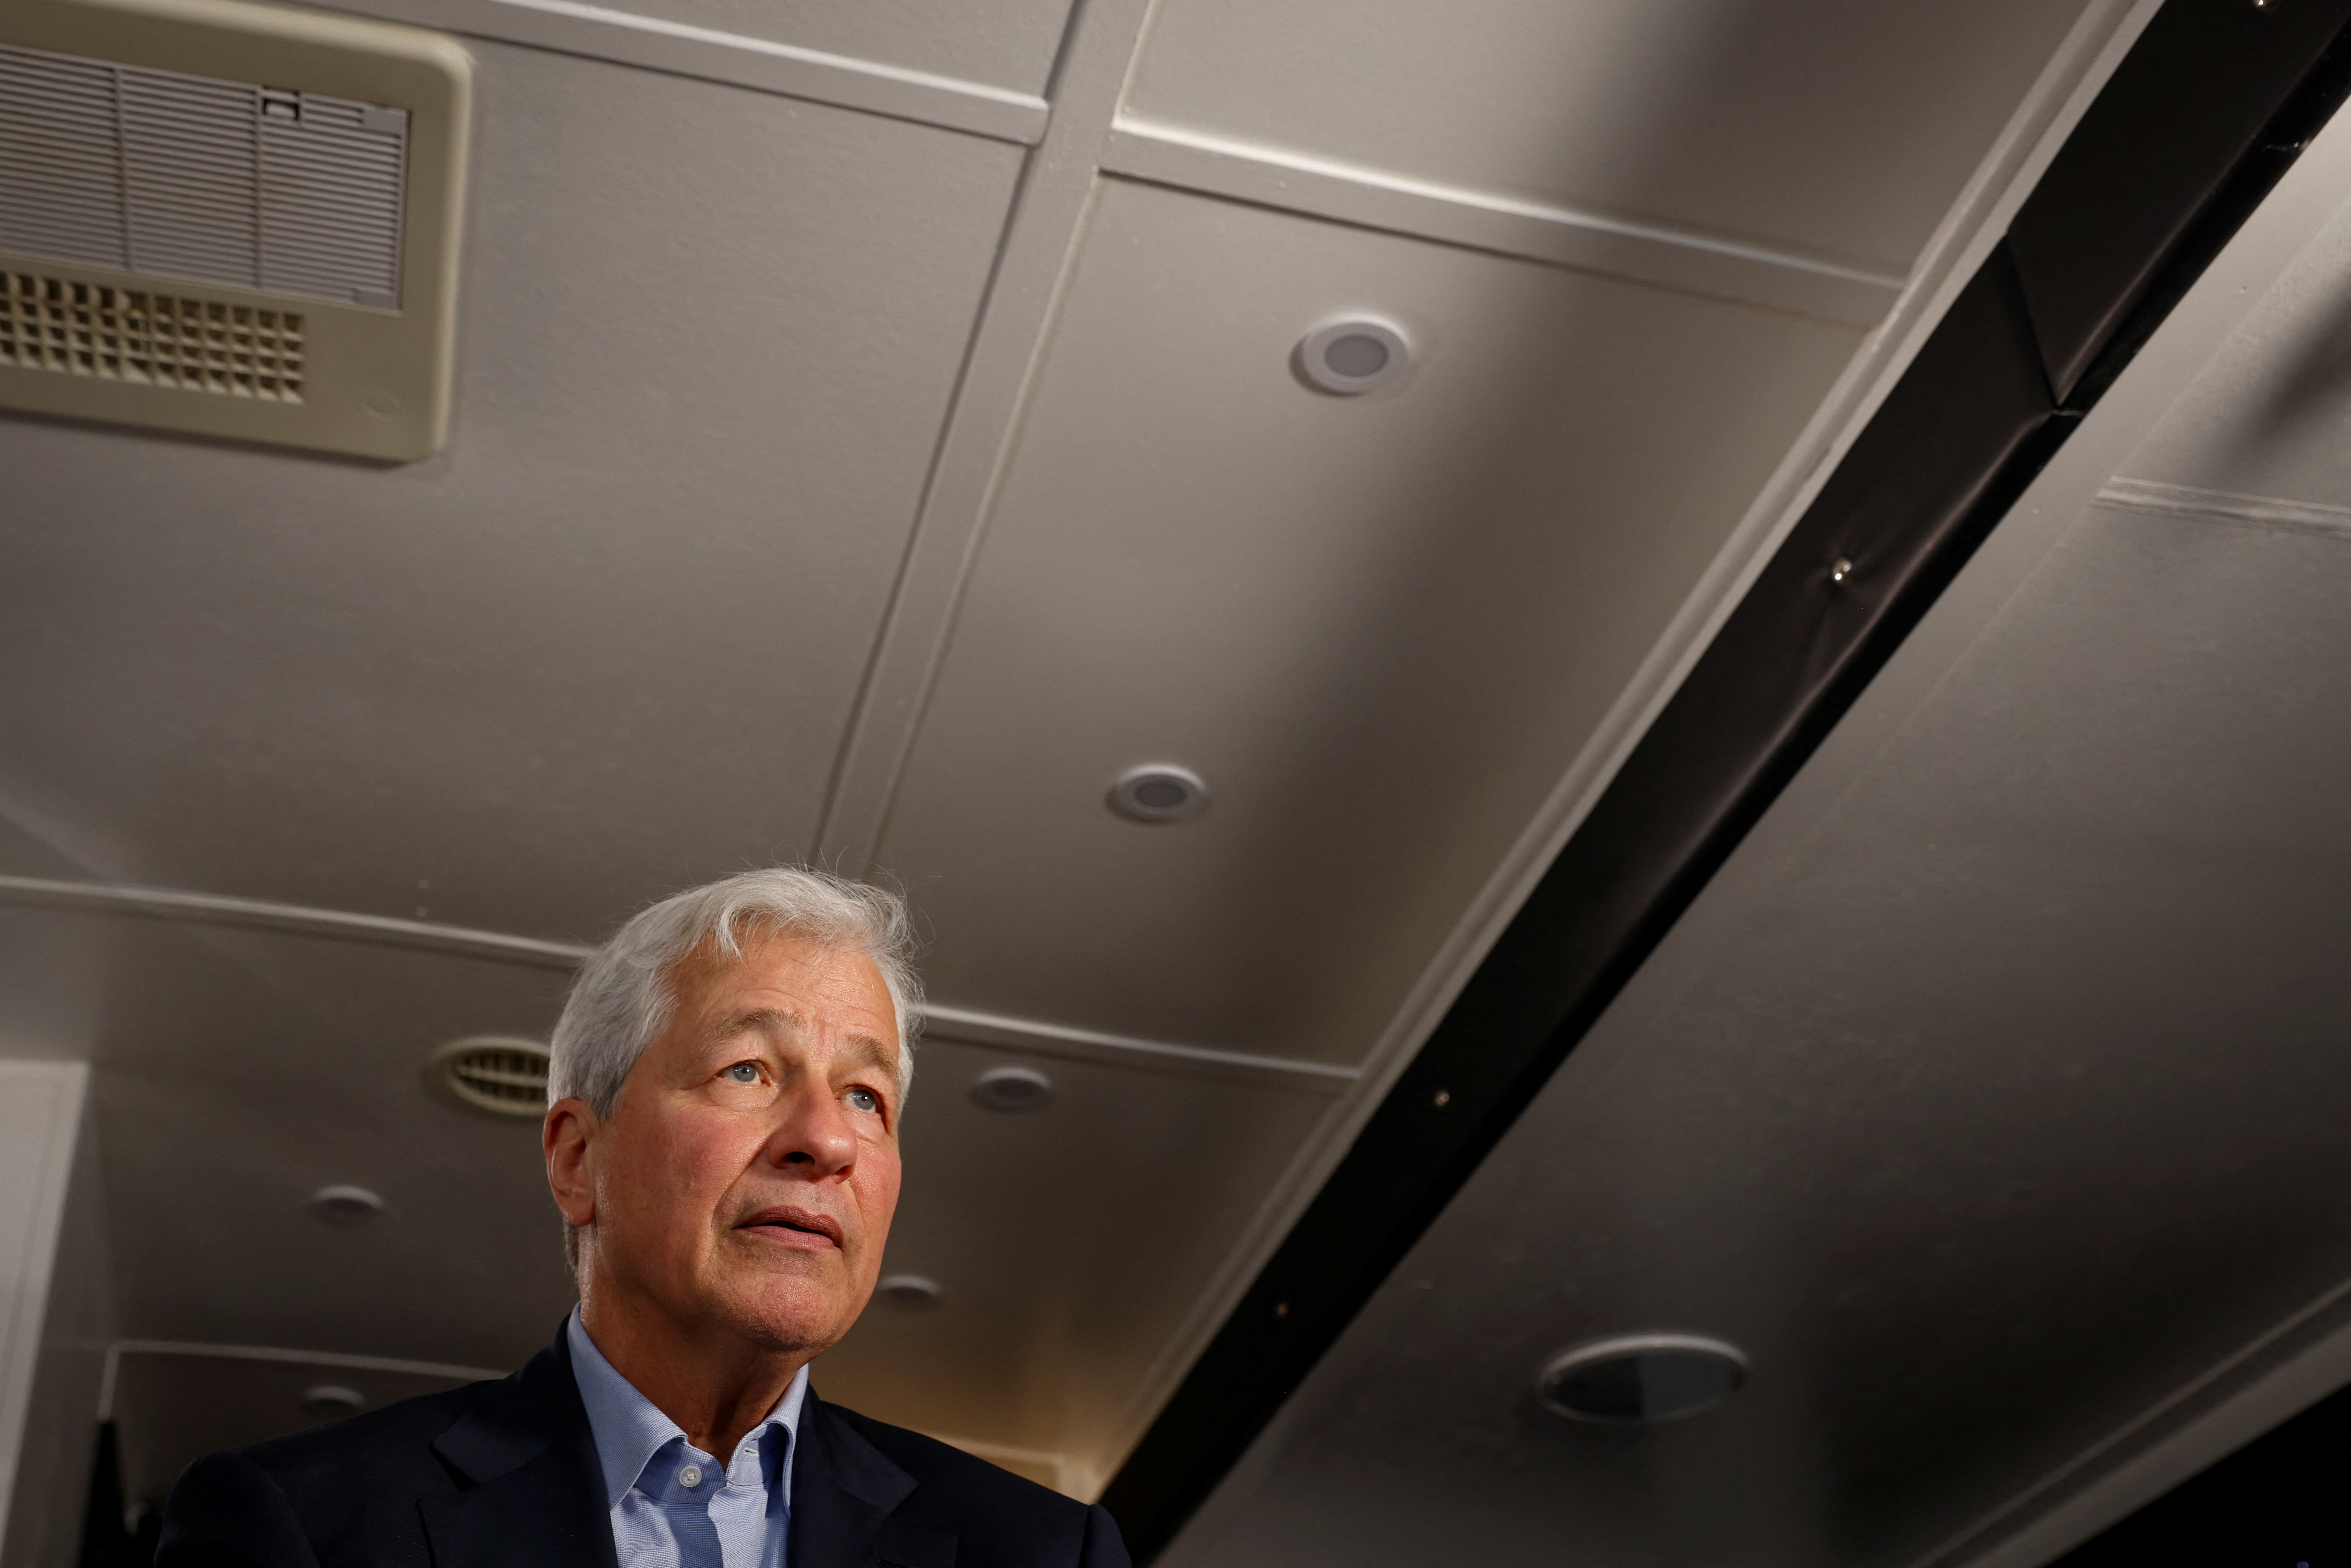 As investors cheer 'disinflation,' Jamie Dimon says not so fast: Morning Brief